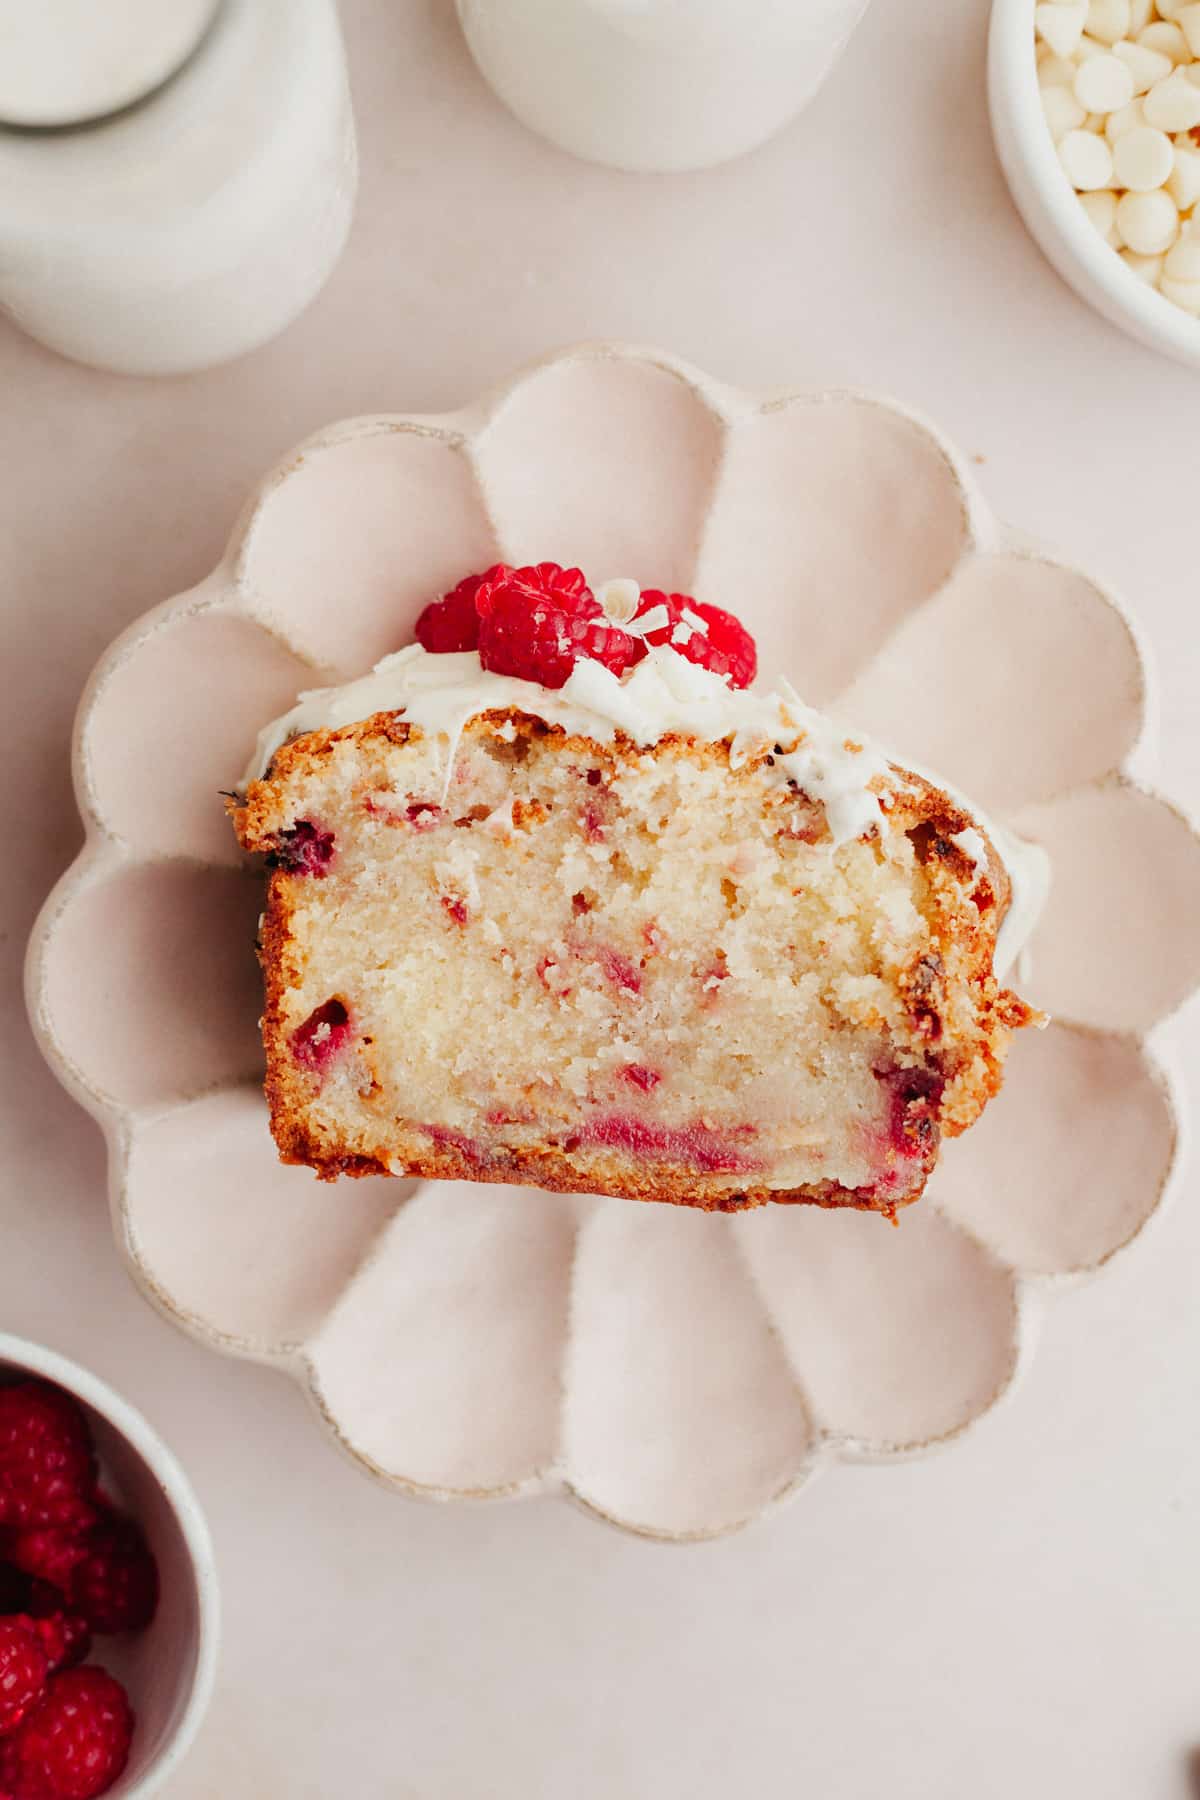 A slice of white chocolate raspberry cake on a scalloped pink plate.